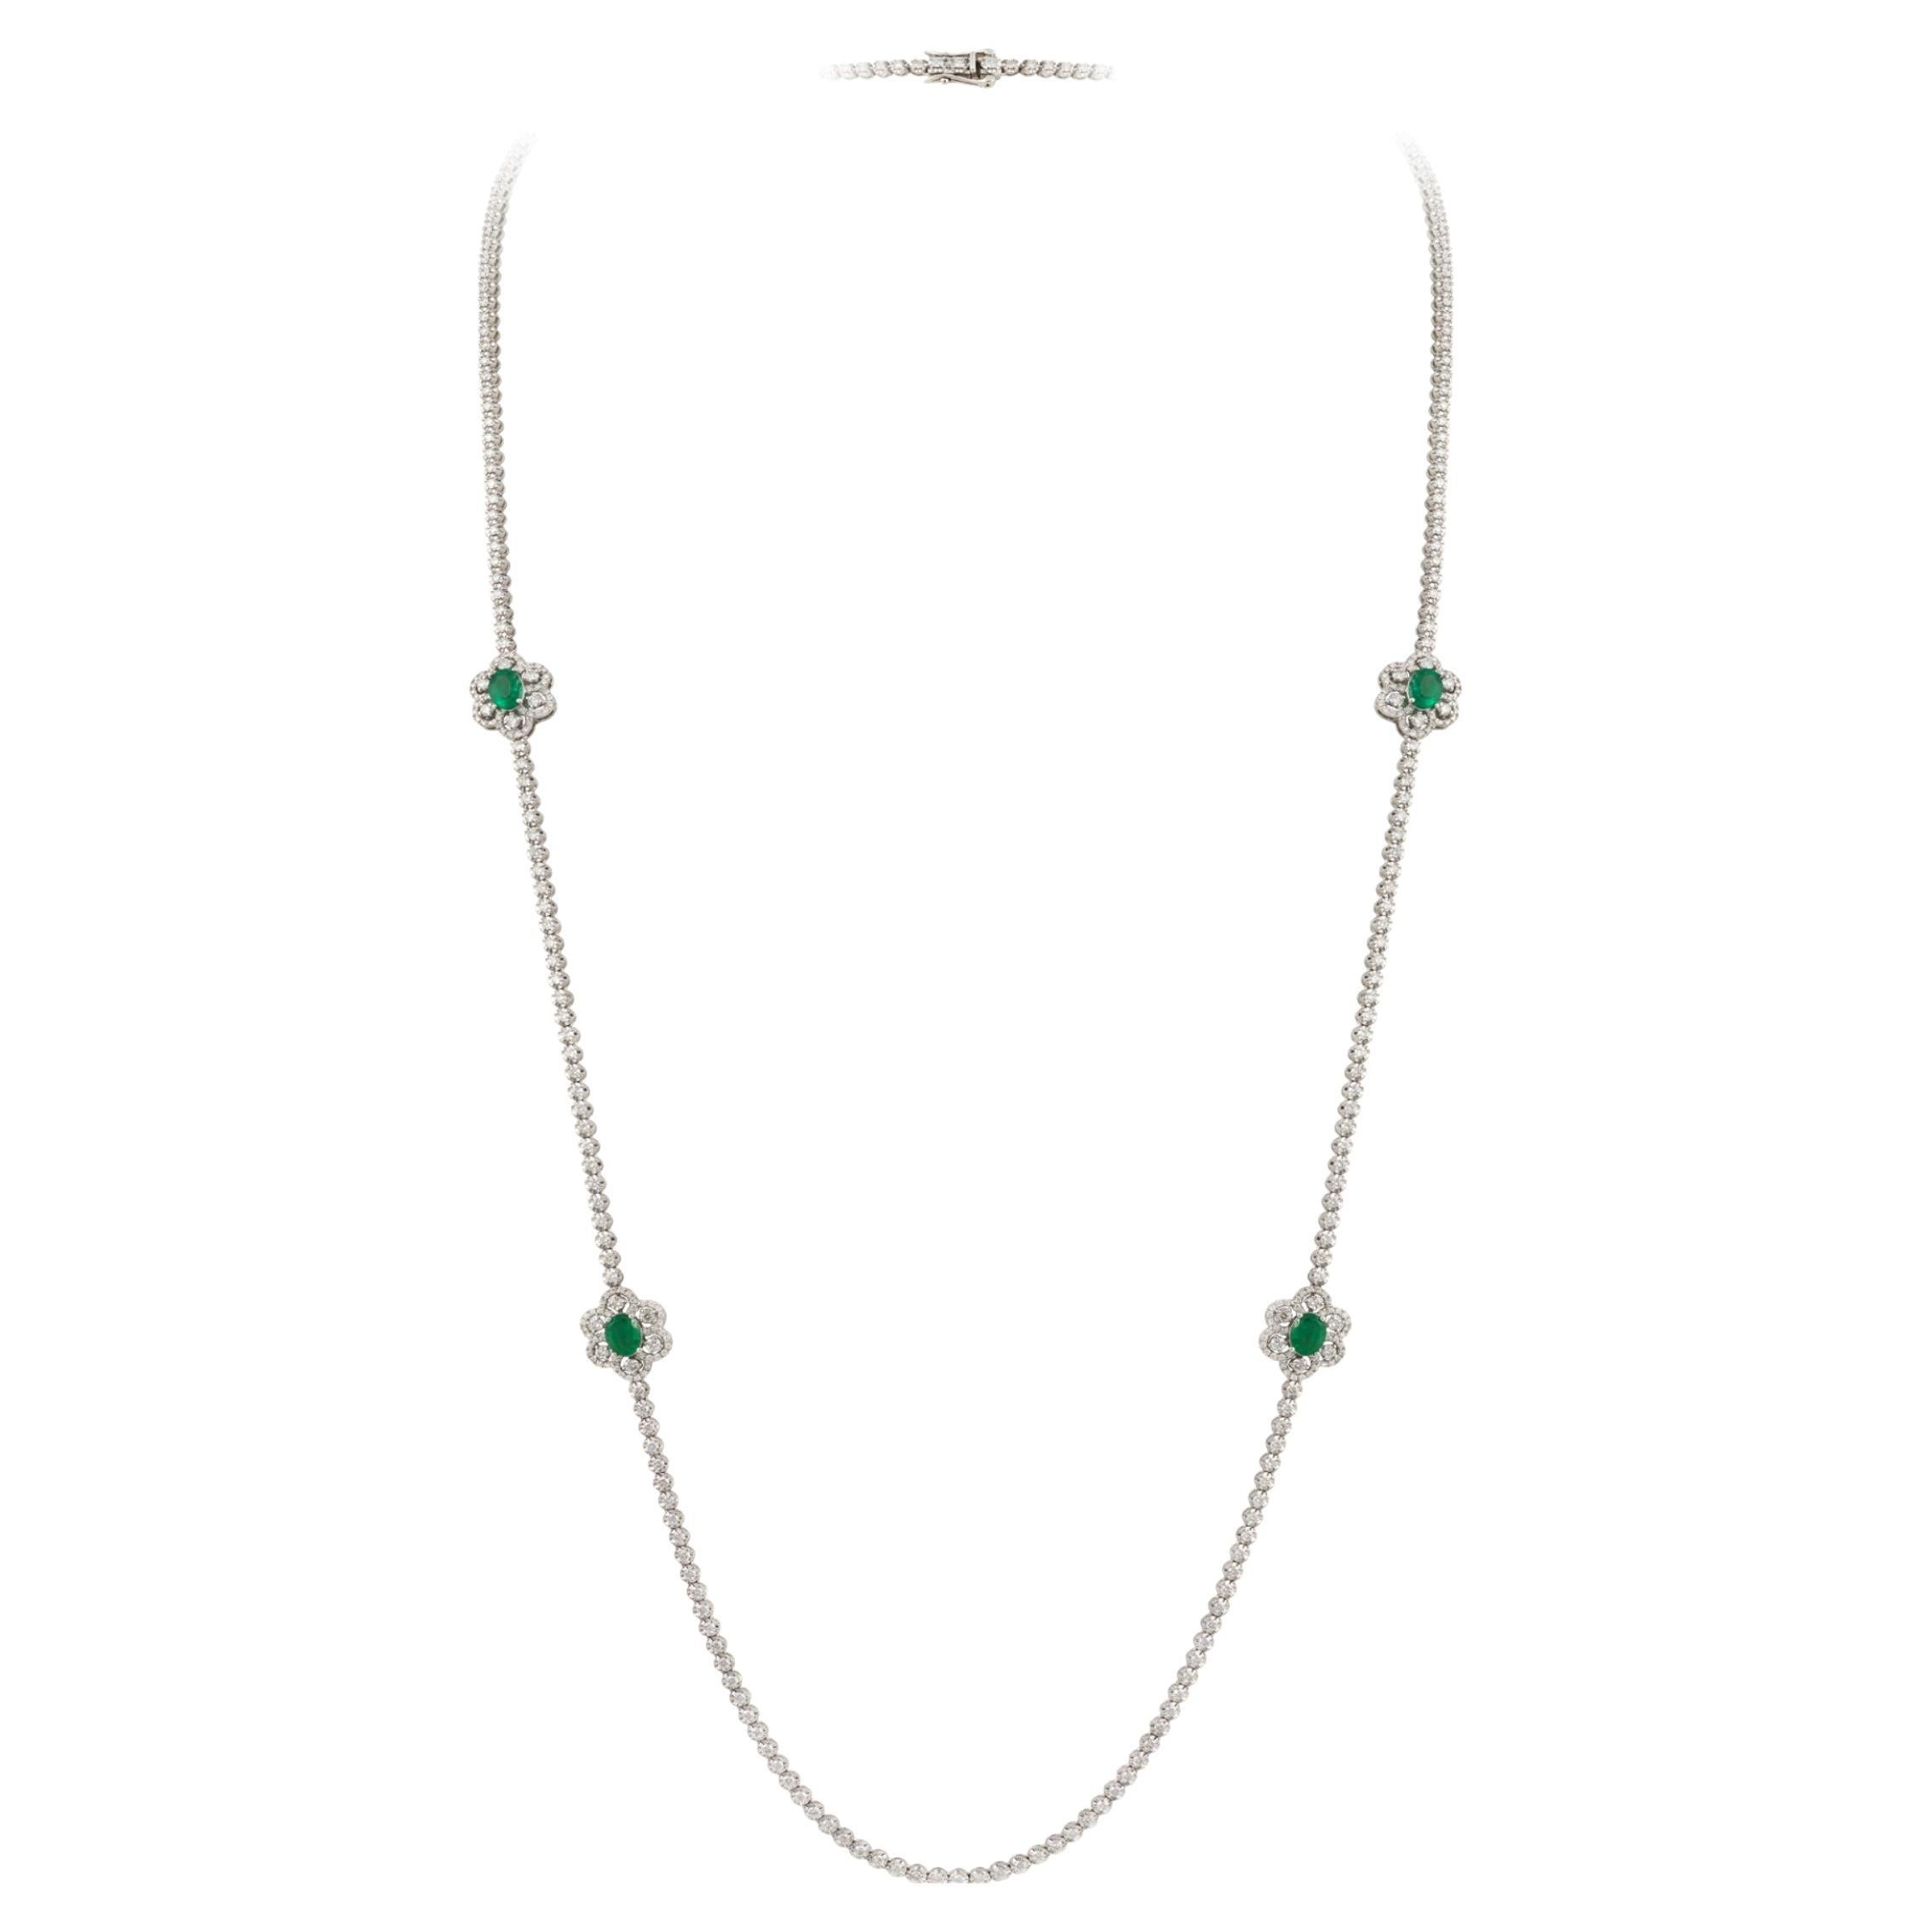 NWT $39, 500 18KT Gold Rare Important Fancy 10CT Emerald Diamond Drop Necklace For Sale